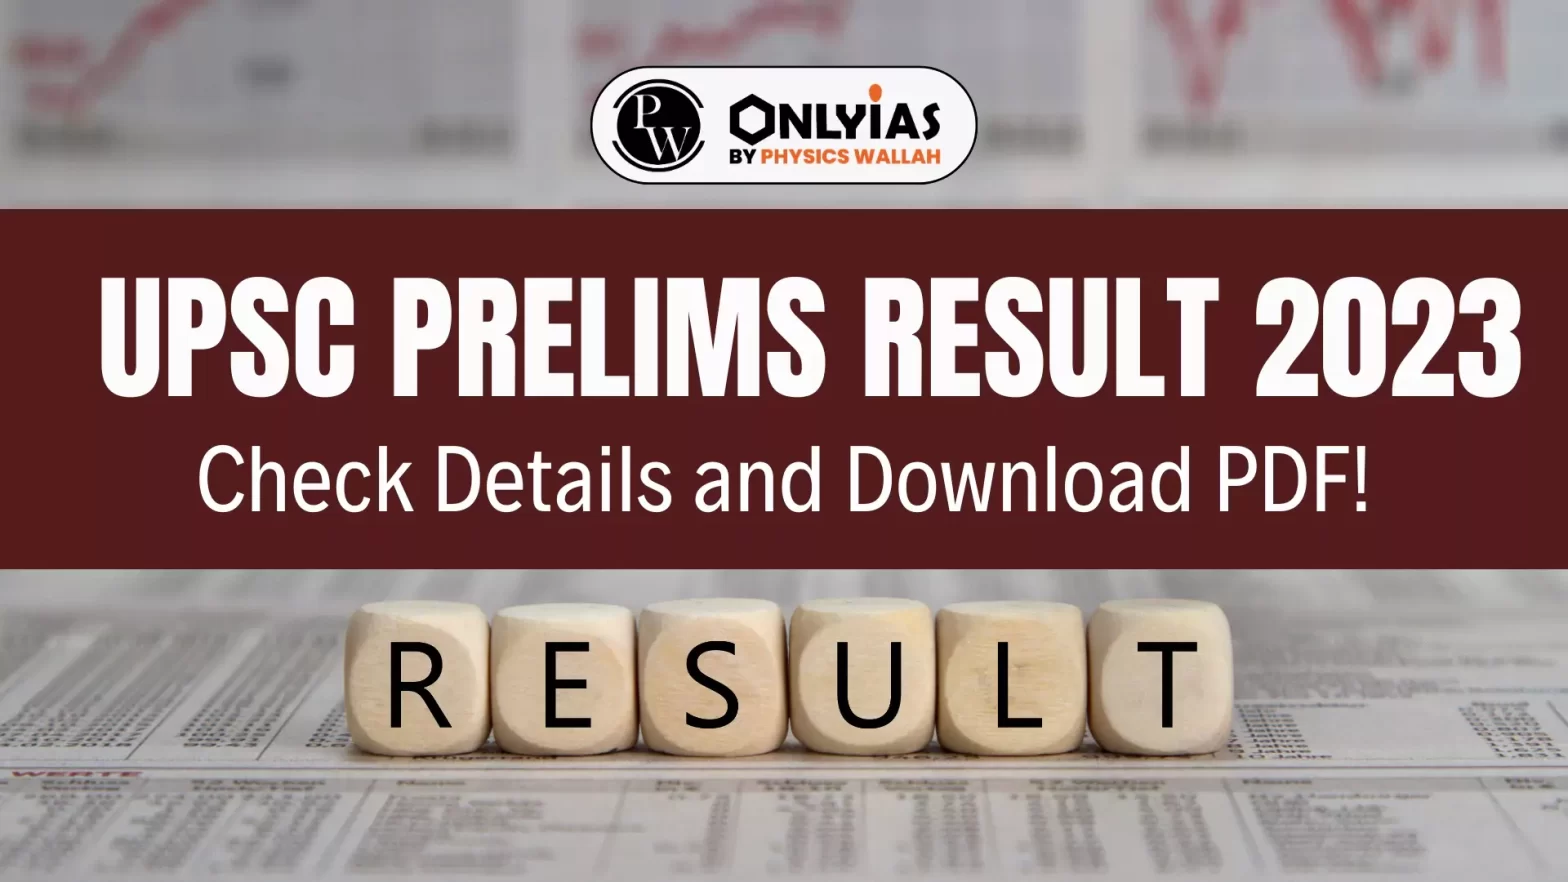 UPSC Prelims Result 2023, Check Details and Download PDF!